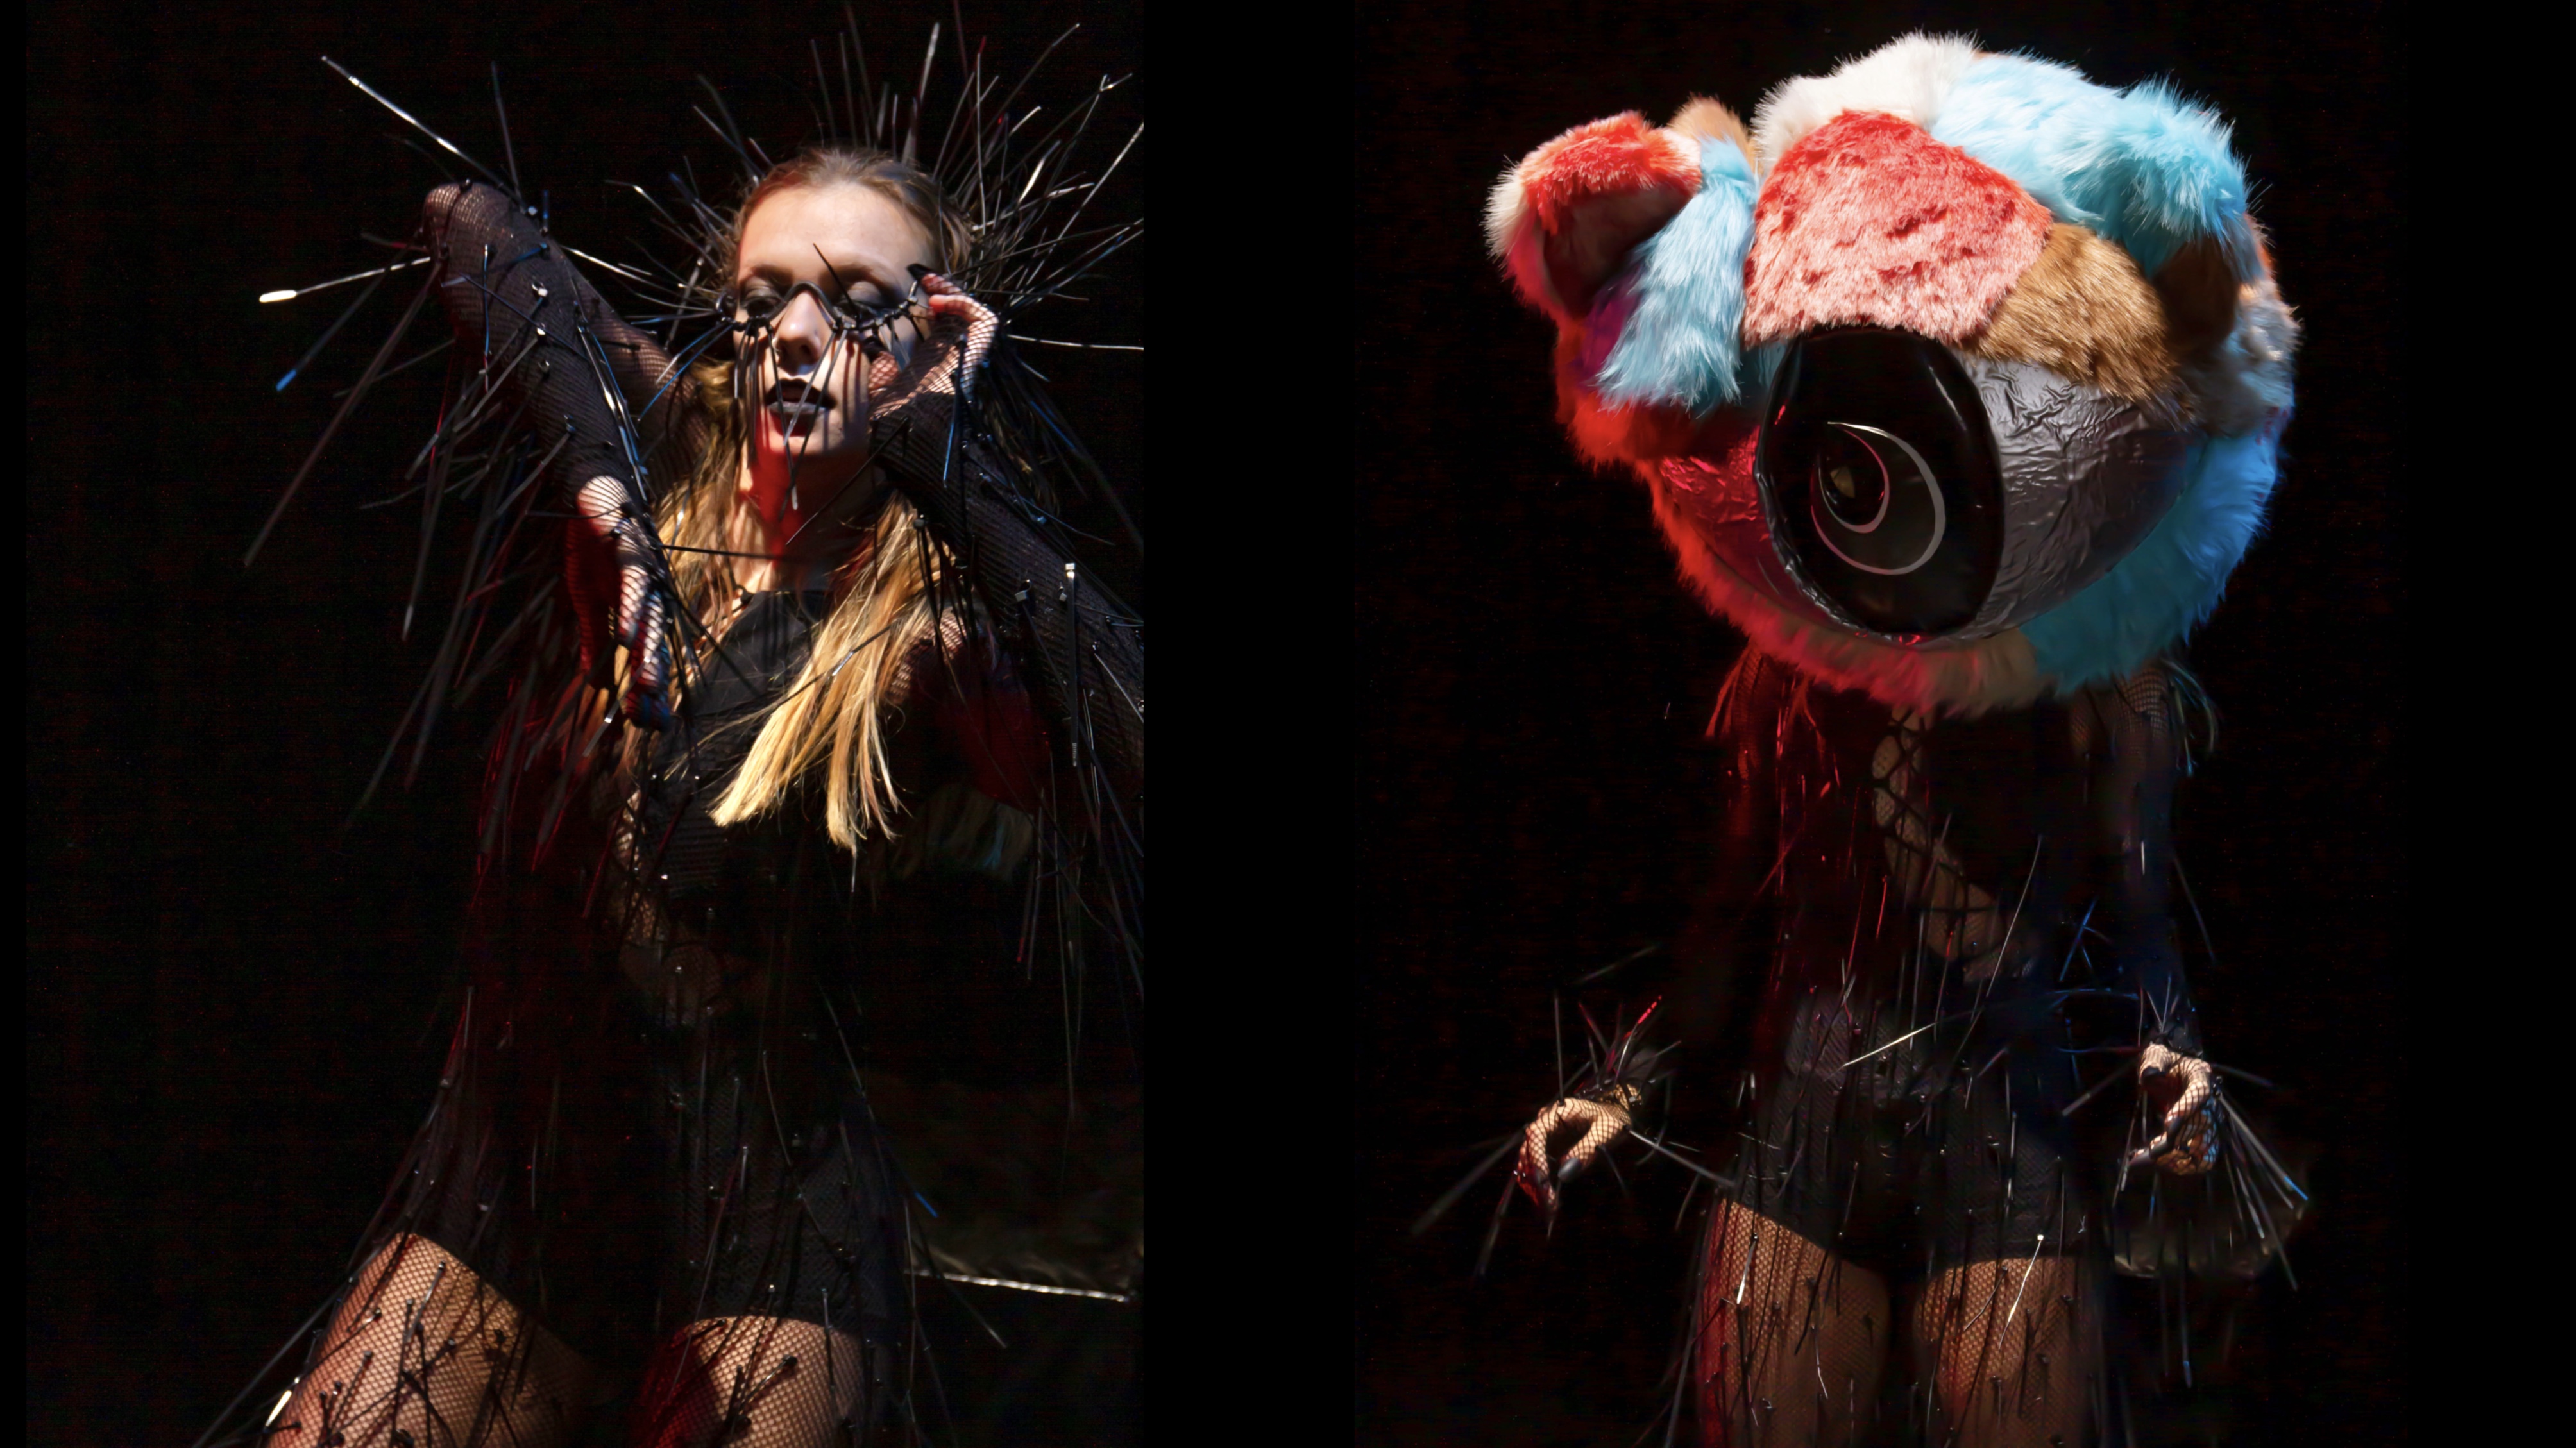 Two female models dressed in gothic black, one with a colourful teddy bear's head.